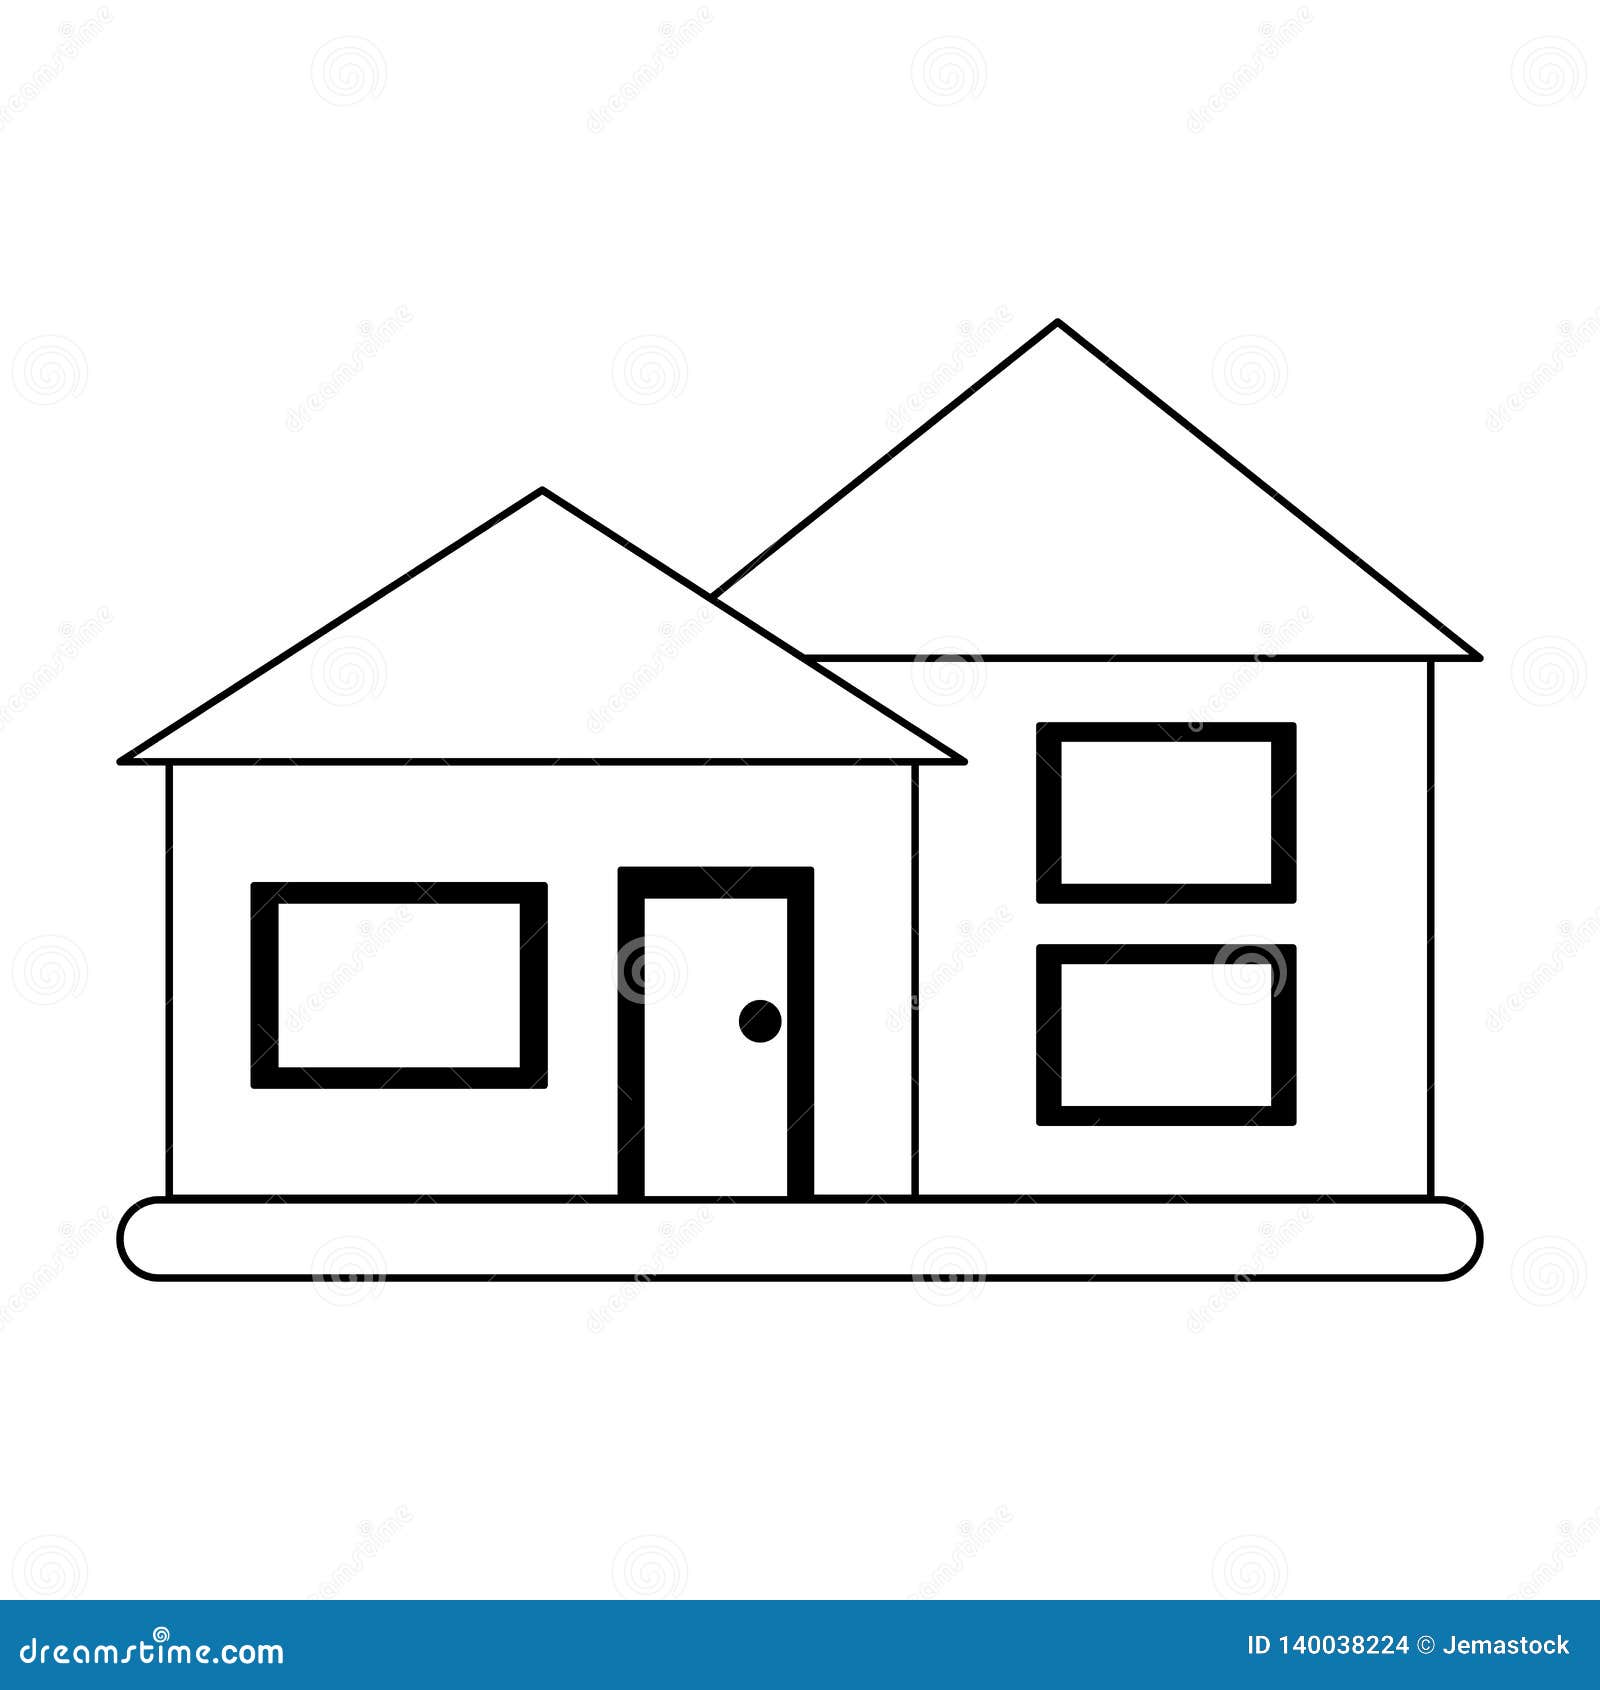 Real Estate House Black and White Stock Vector - Illustration of ...